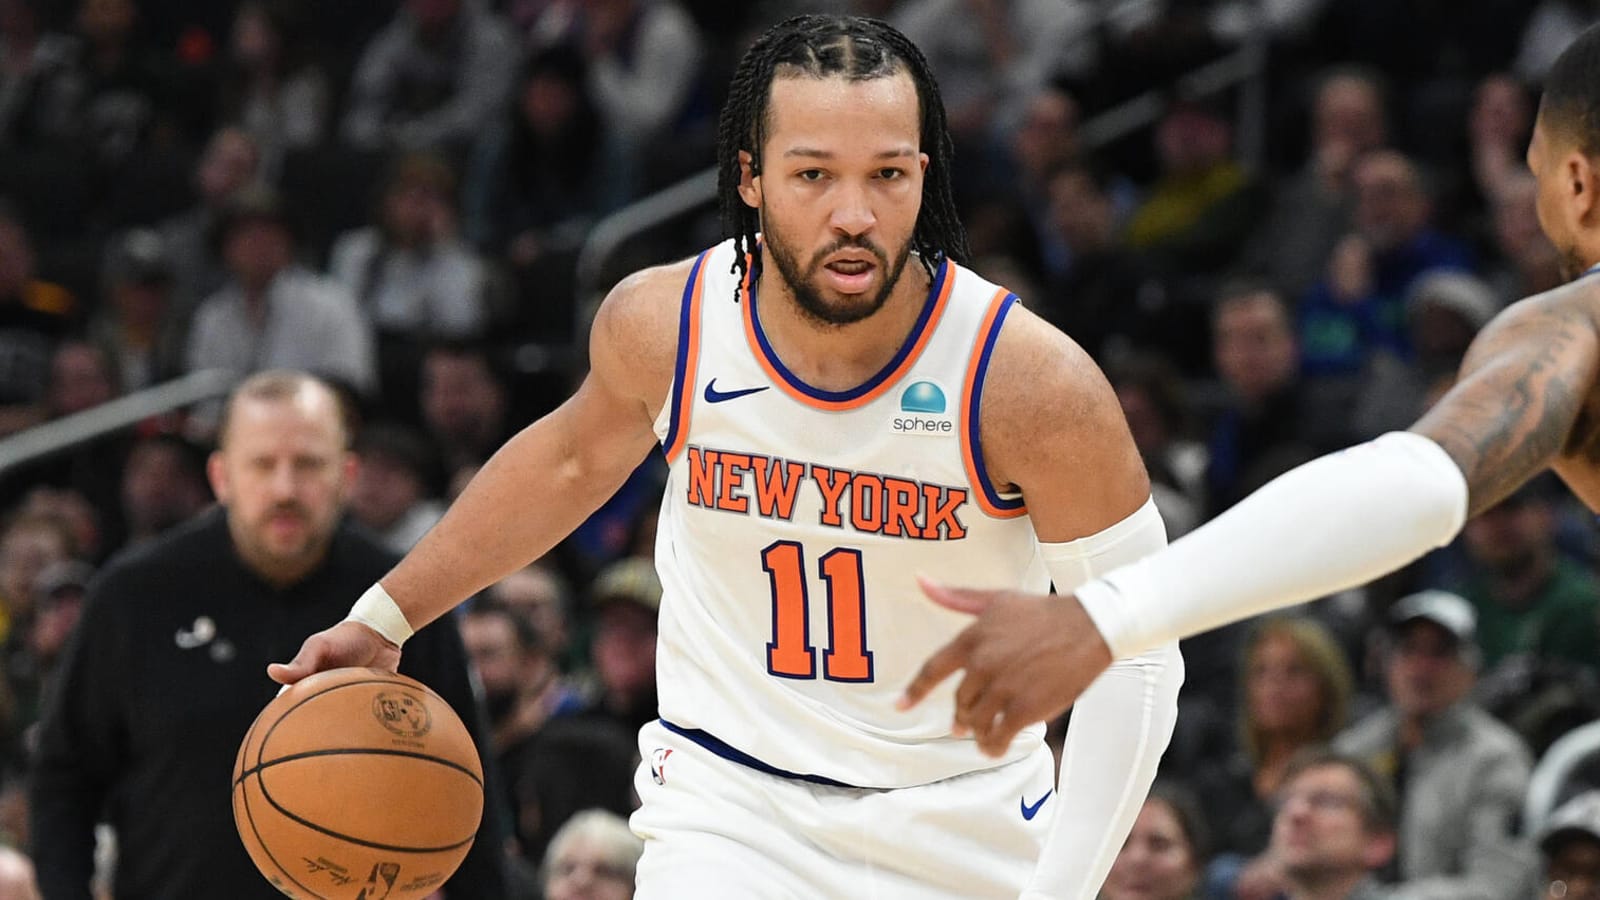 Jalen Brunson called ‘best player in East’ by Kenny Smith as New York Knicks beat Celtics